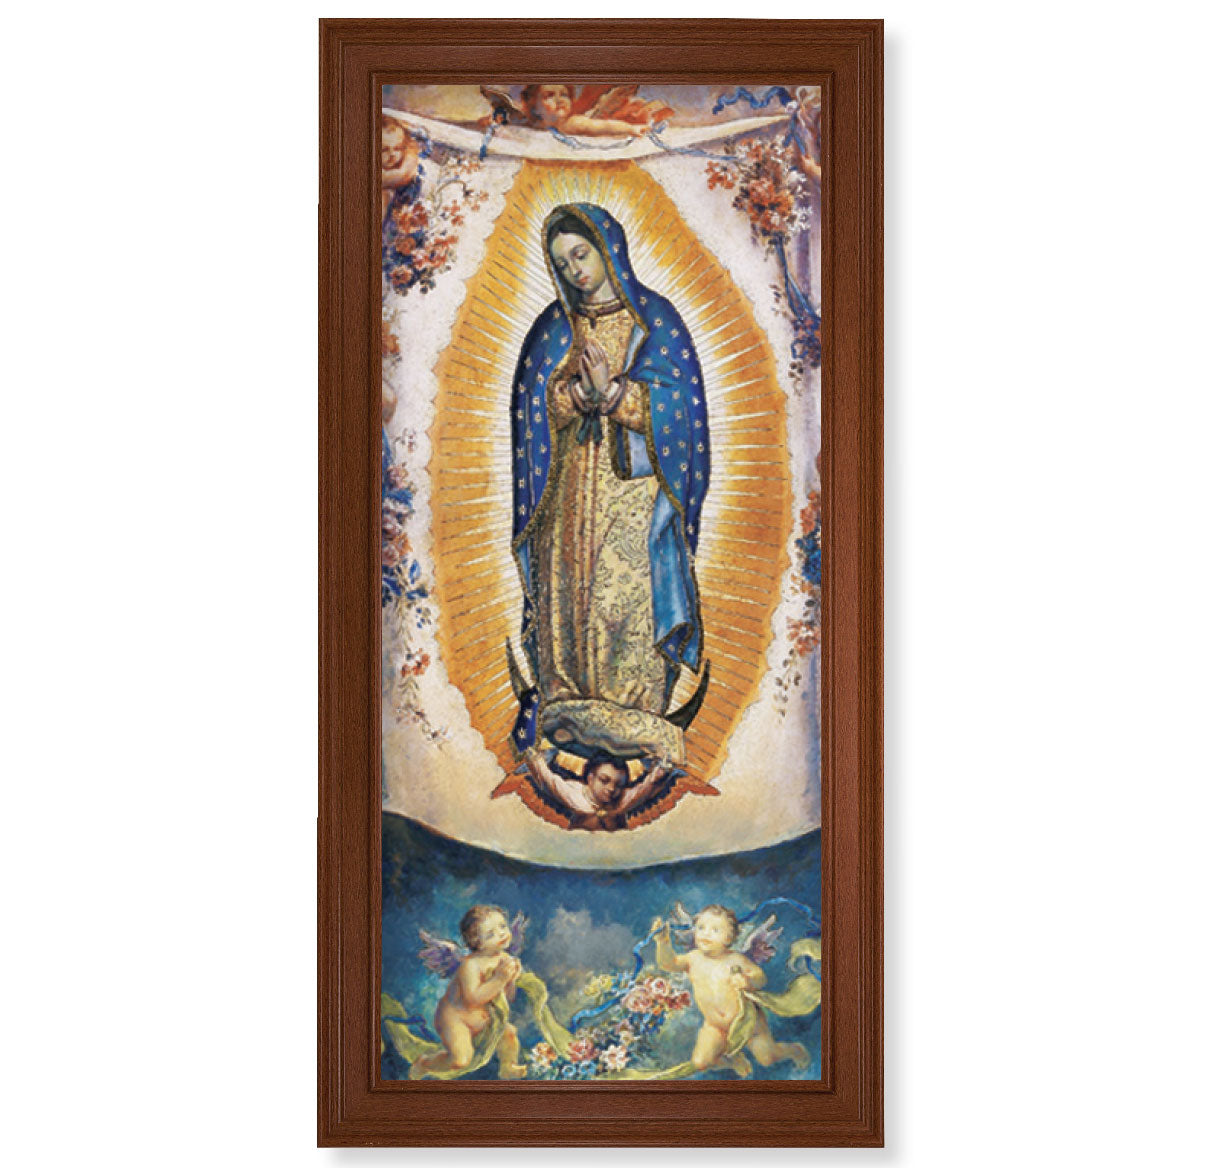 Our Lady of Guadalupe Picture Framed Wall Art Decor, Extra Large, Traditional Natural Walnut Finish Fluted Frame